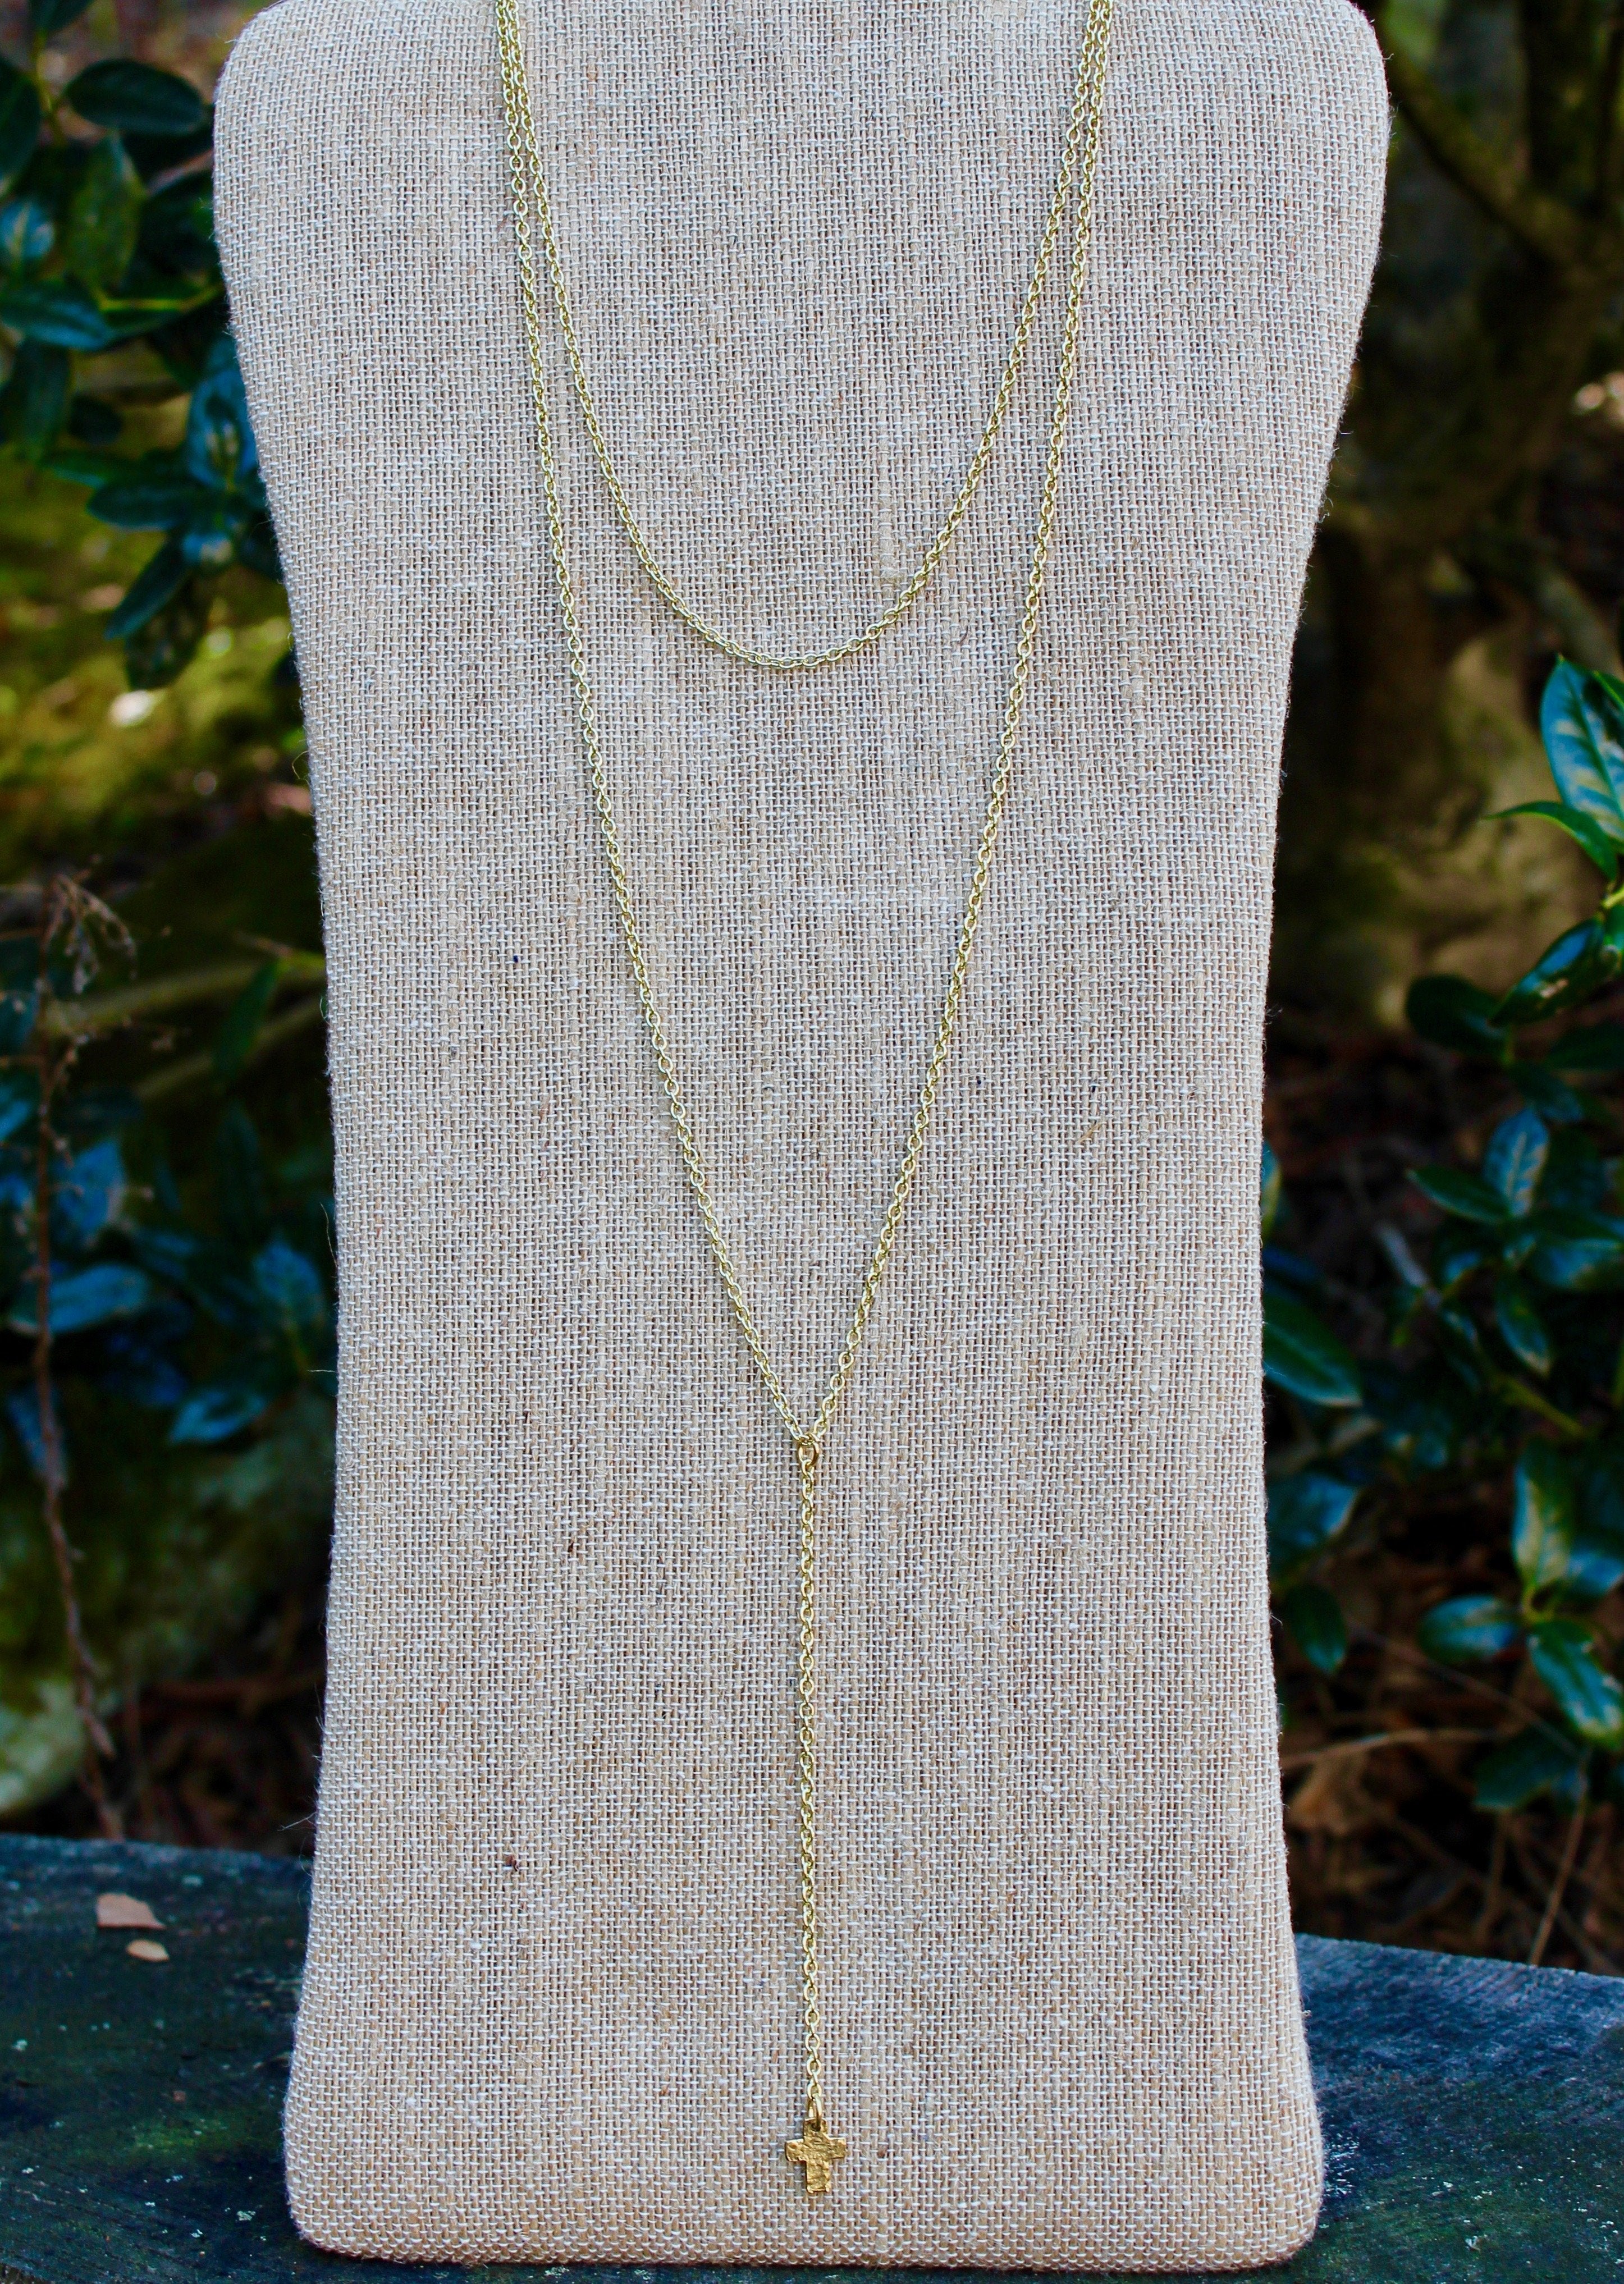 N143G; Double Strand; Goldtone Chain; Small Cross on Drop; Approximately 22" and 31" chains with 4" drop; ; ; Majestees